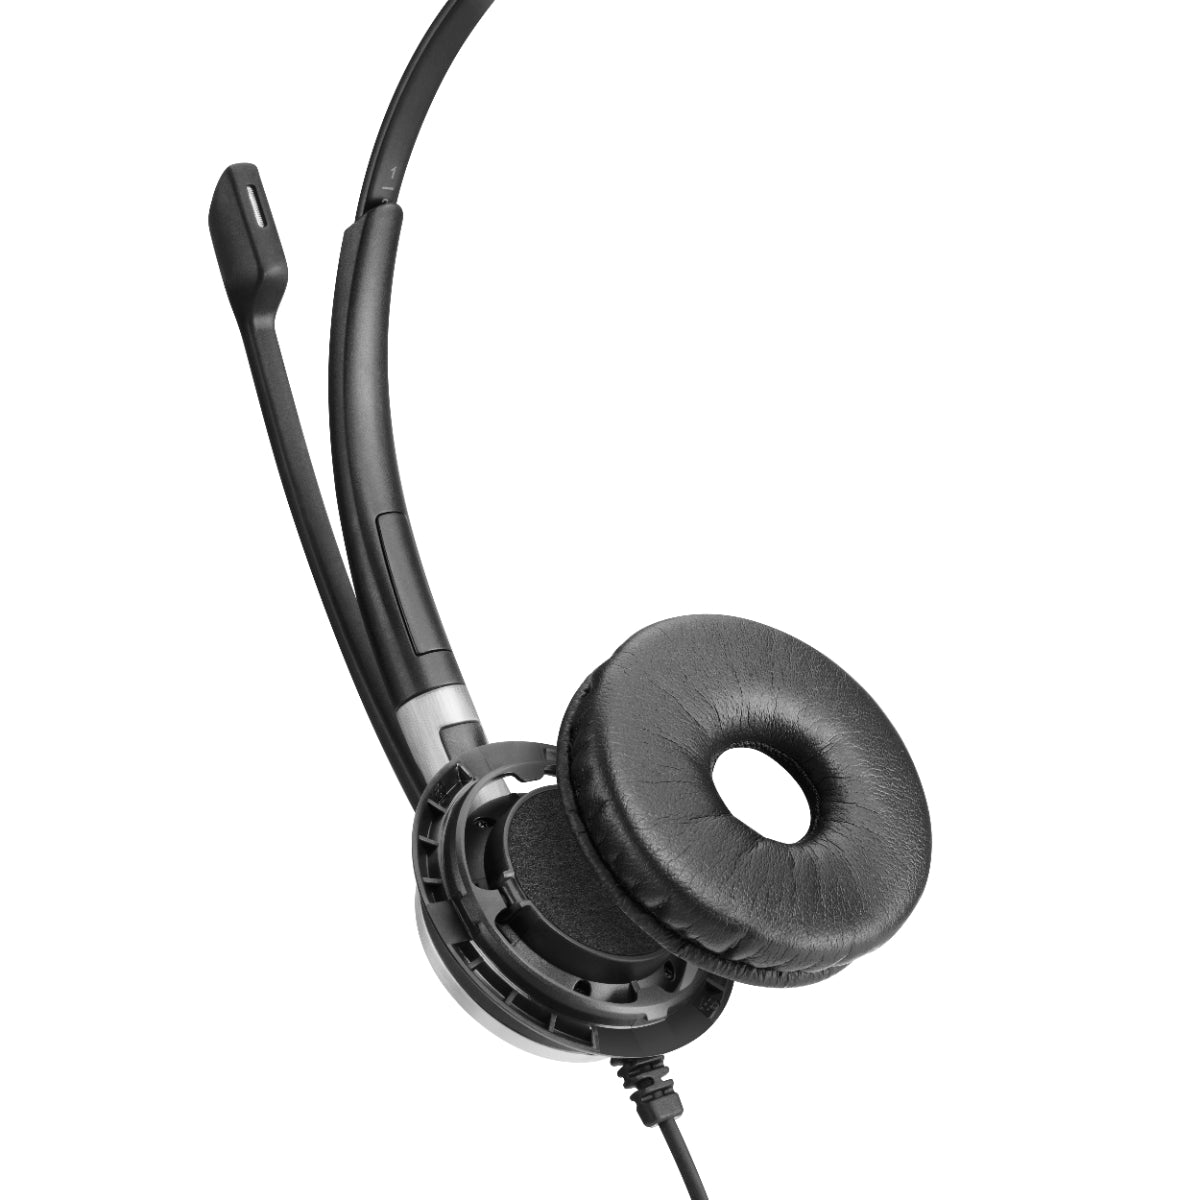 EPOS IMPACT SC 660 Binaural Office Headset, Black-Silver, 1m Cable, Easy Disconnect